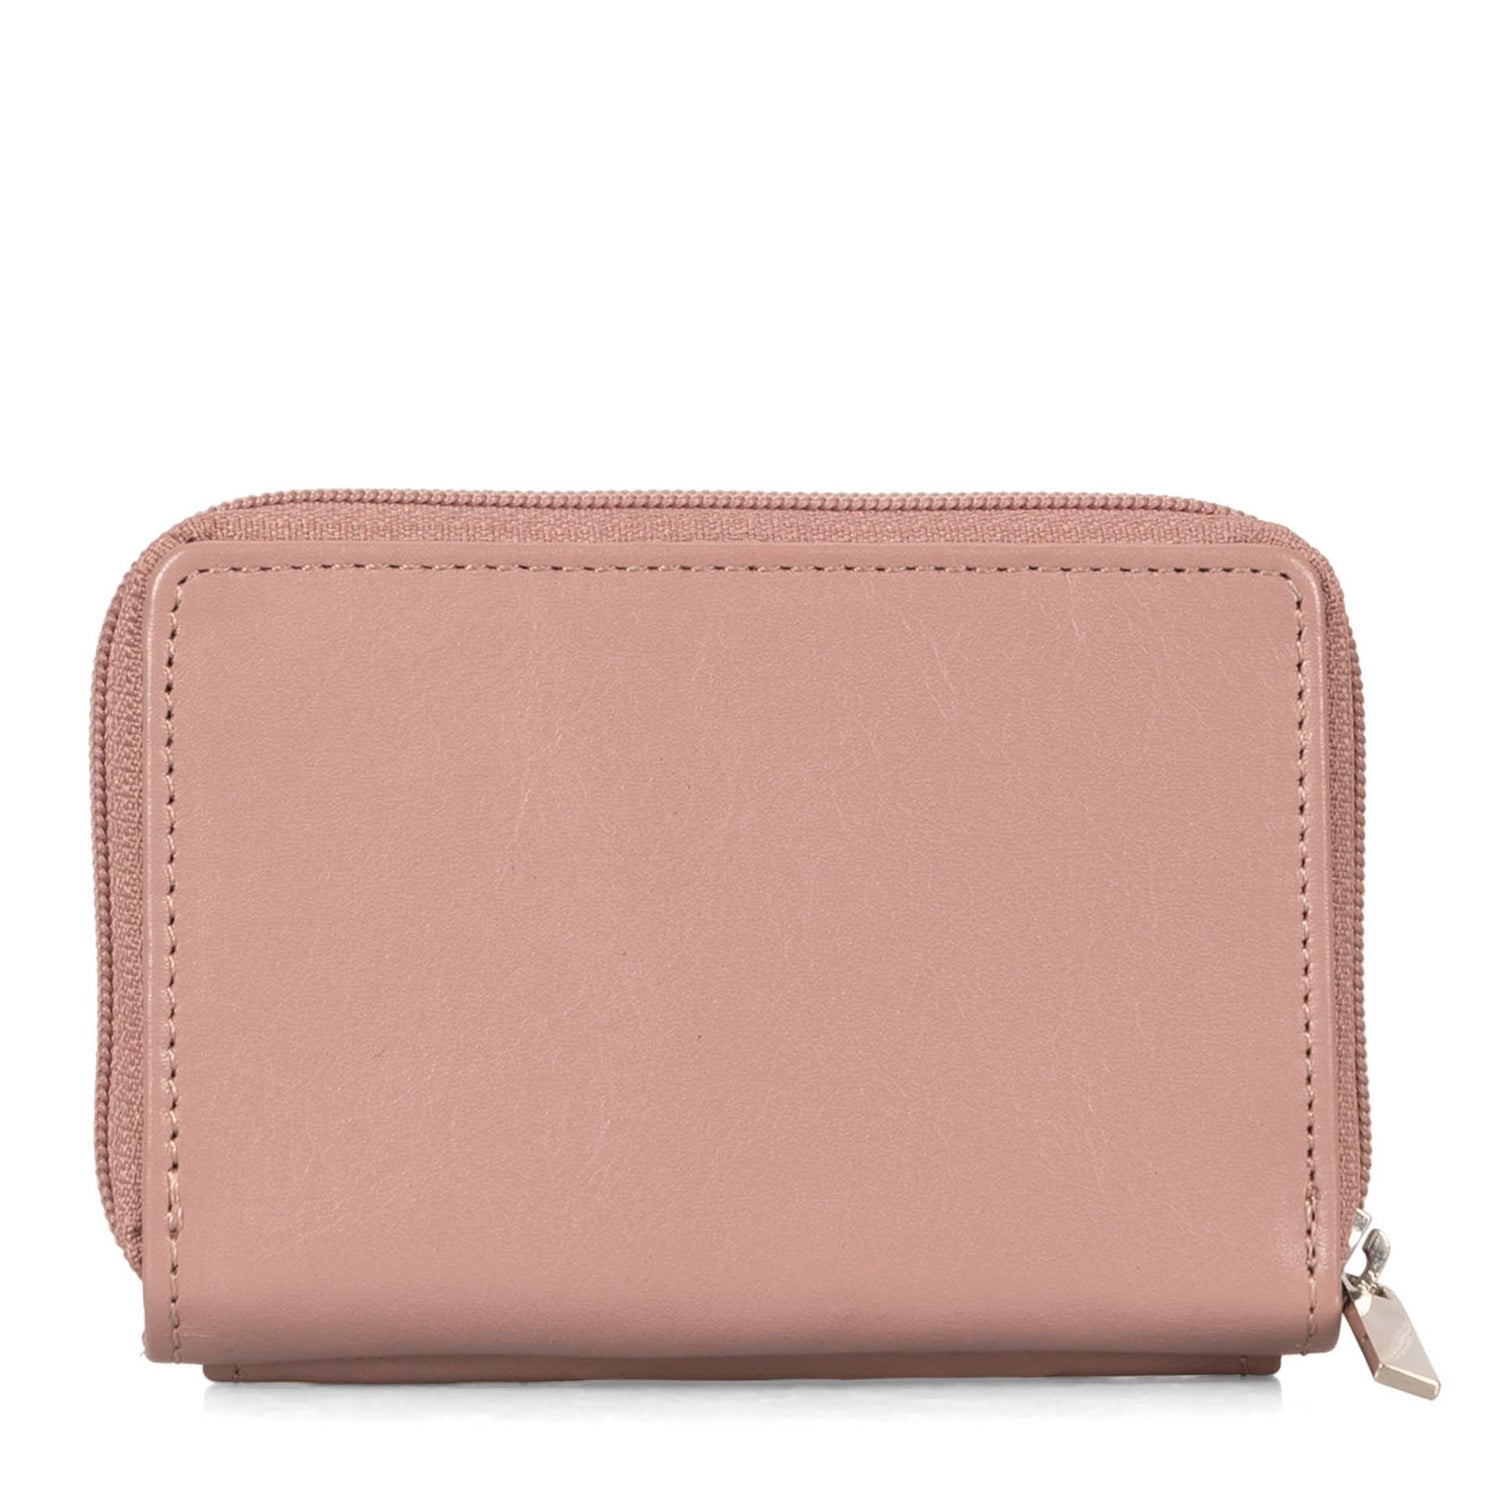 Back side of a pink card holder called basics by tracker, showing its soft leather texture.